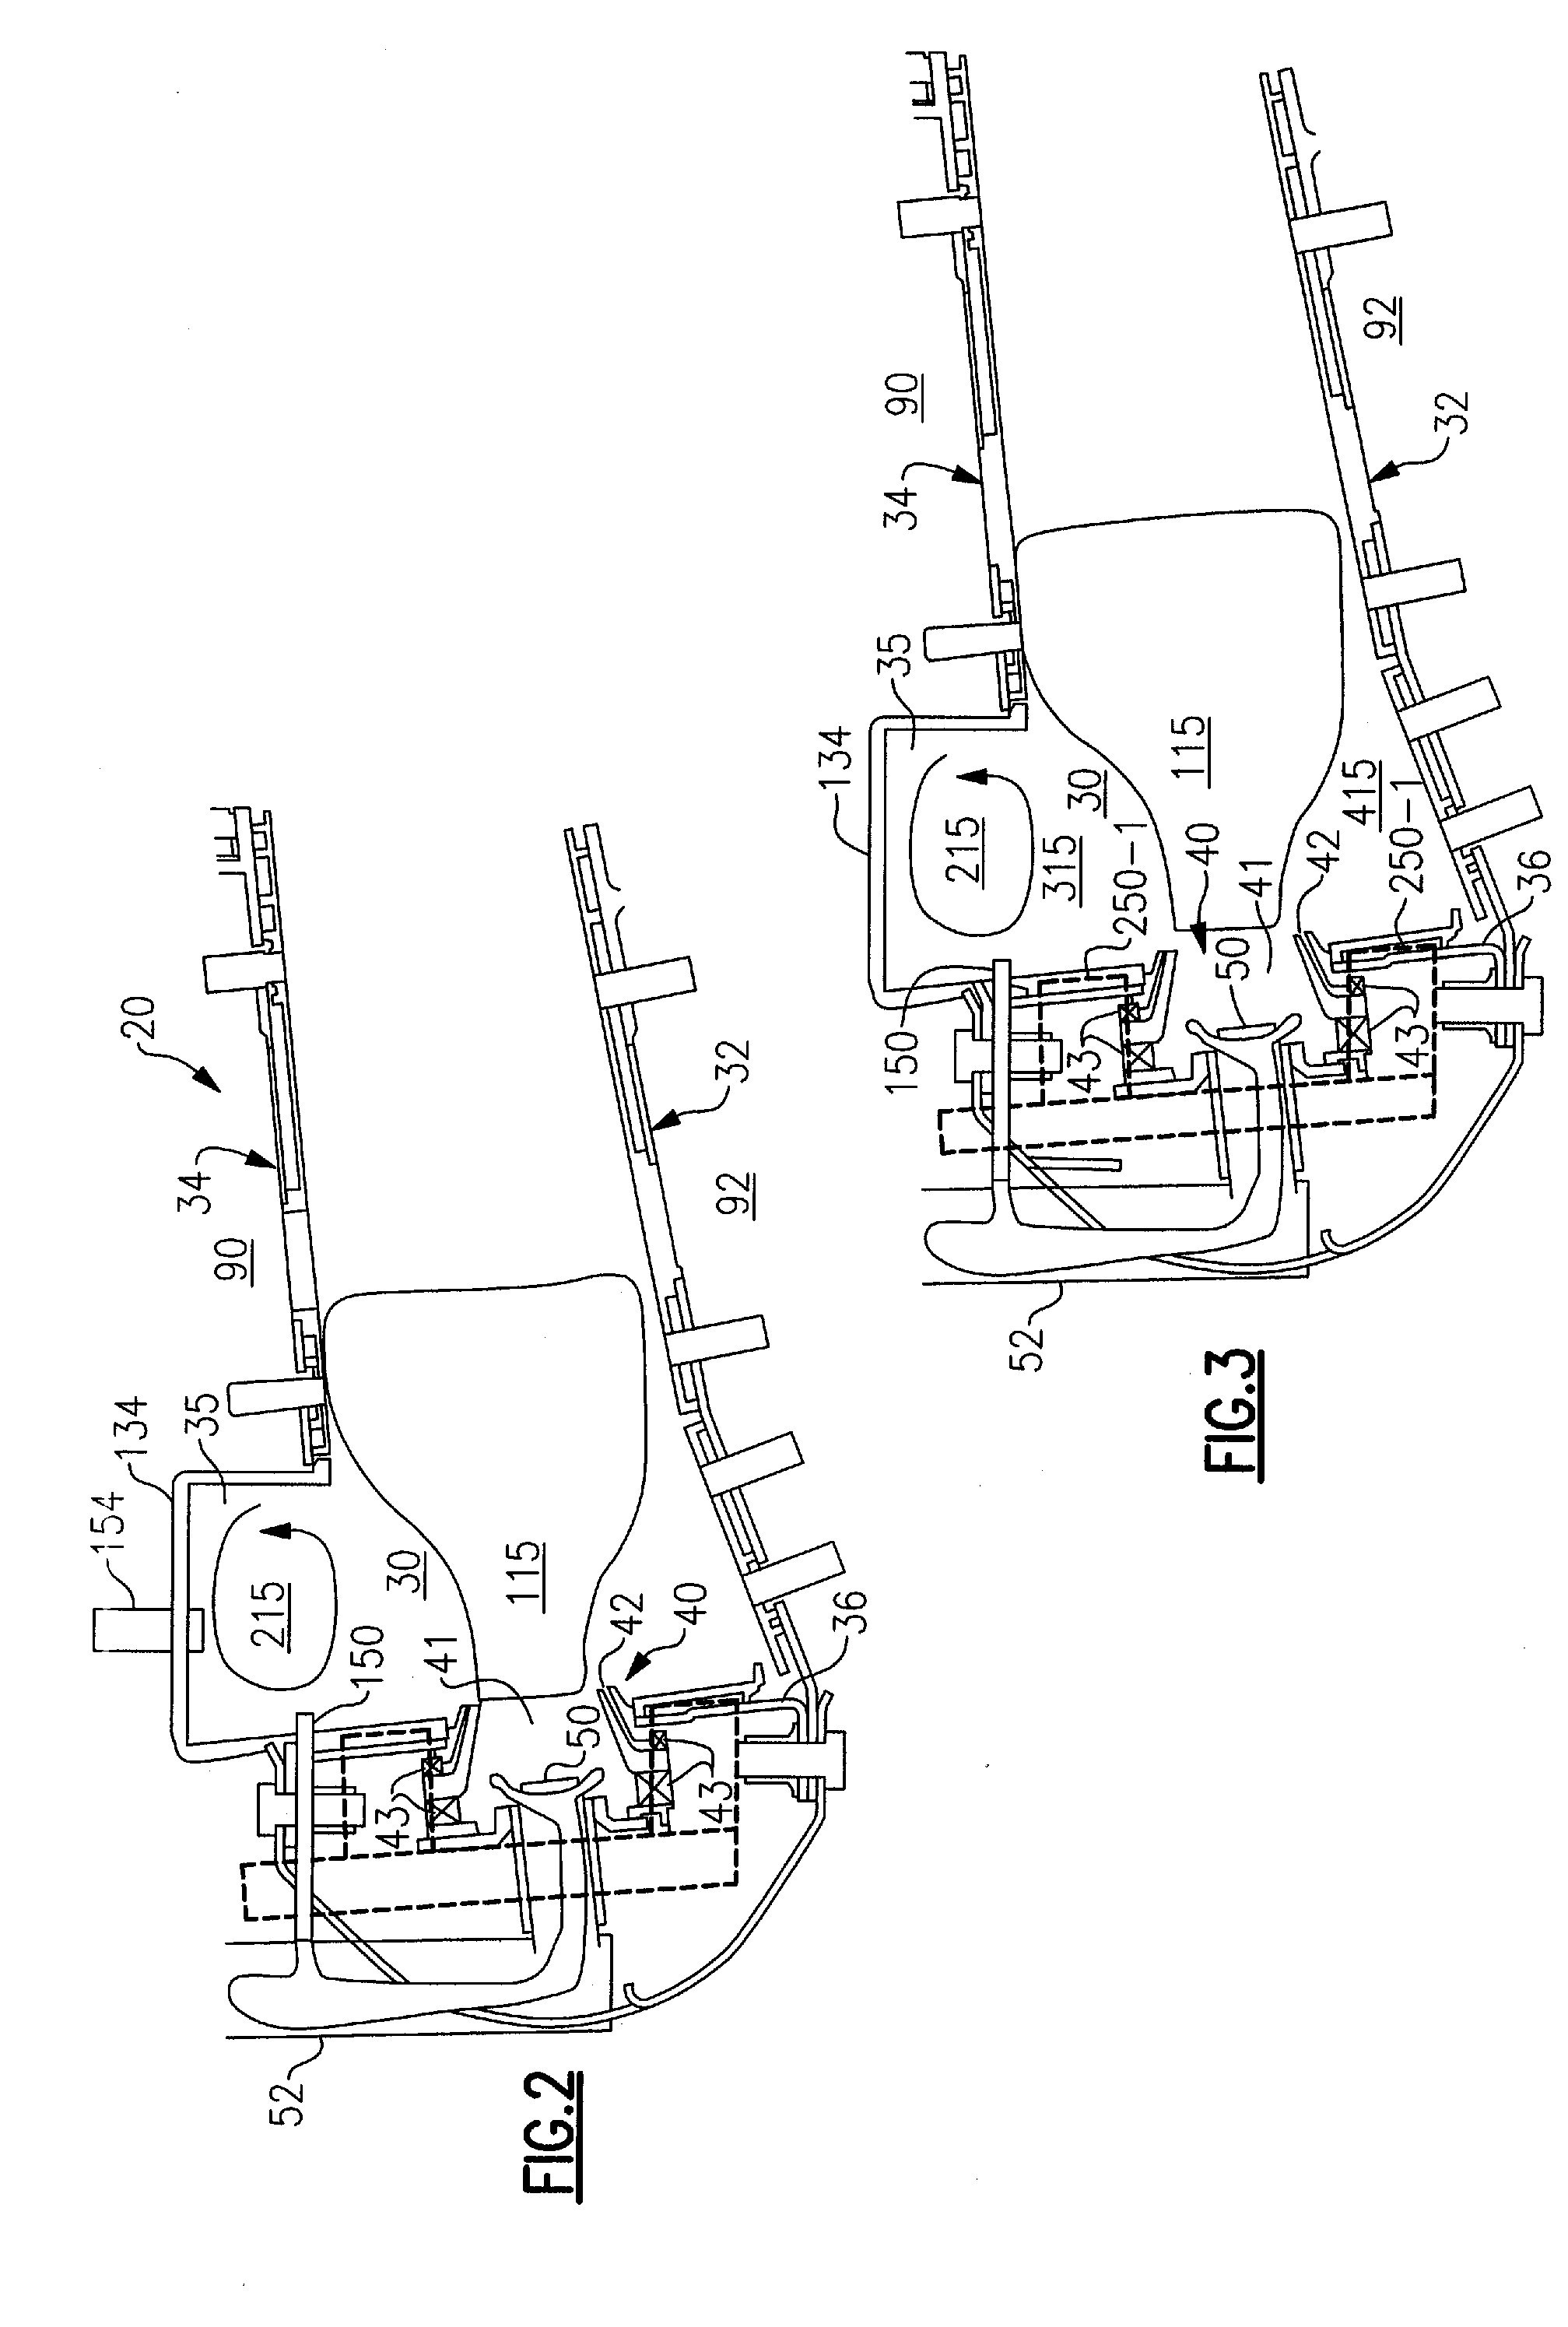 Gas turbine combustor with staged combustion